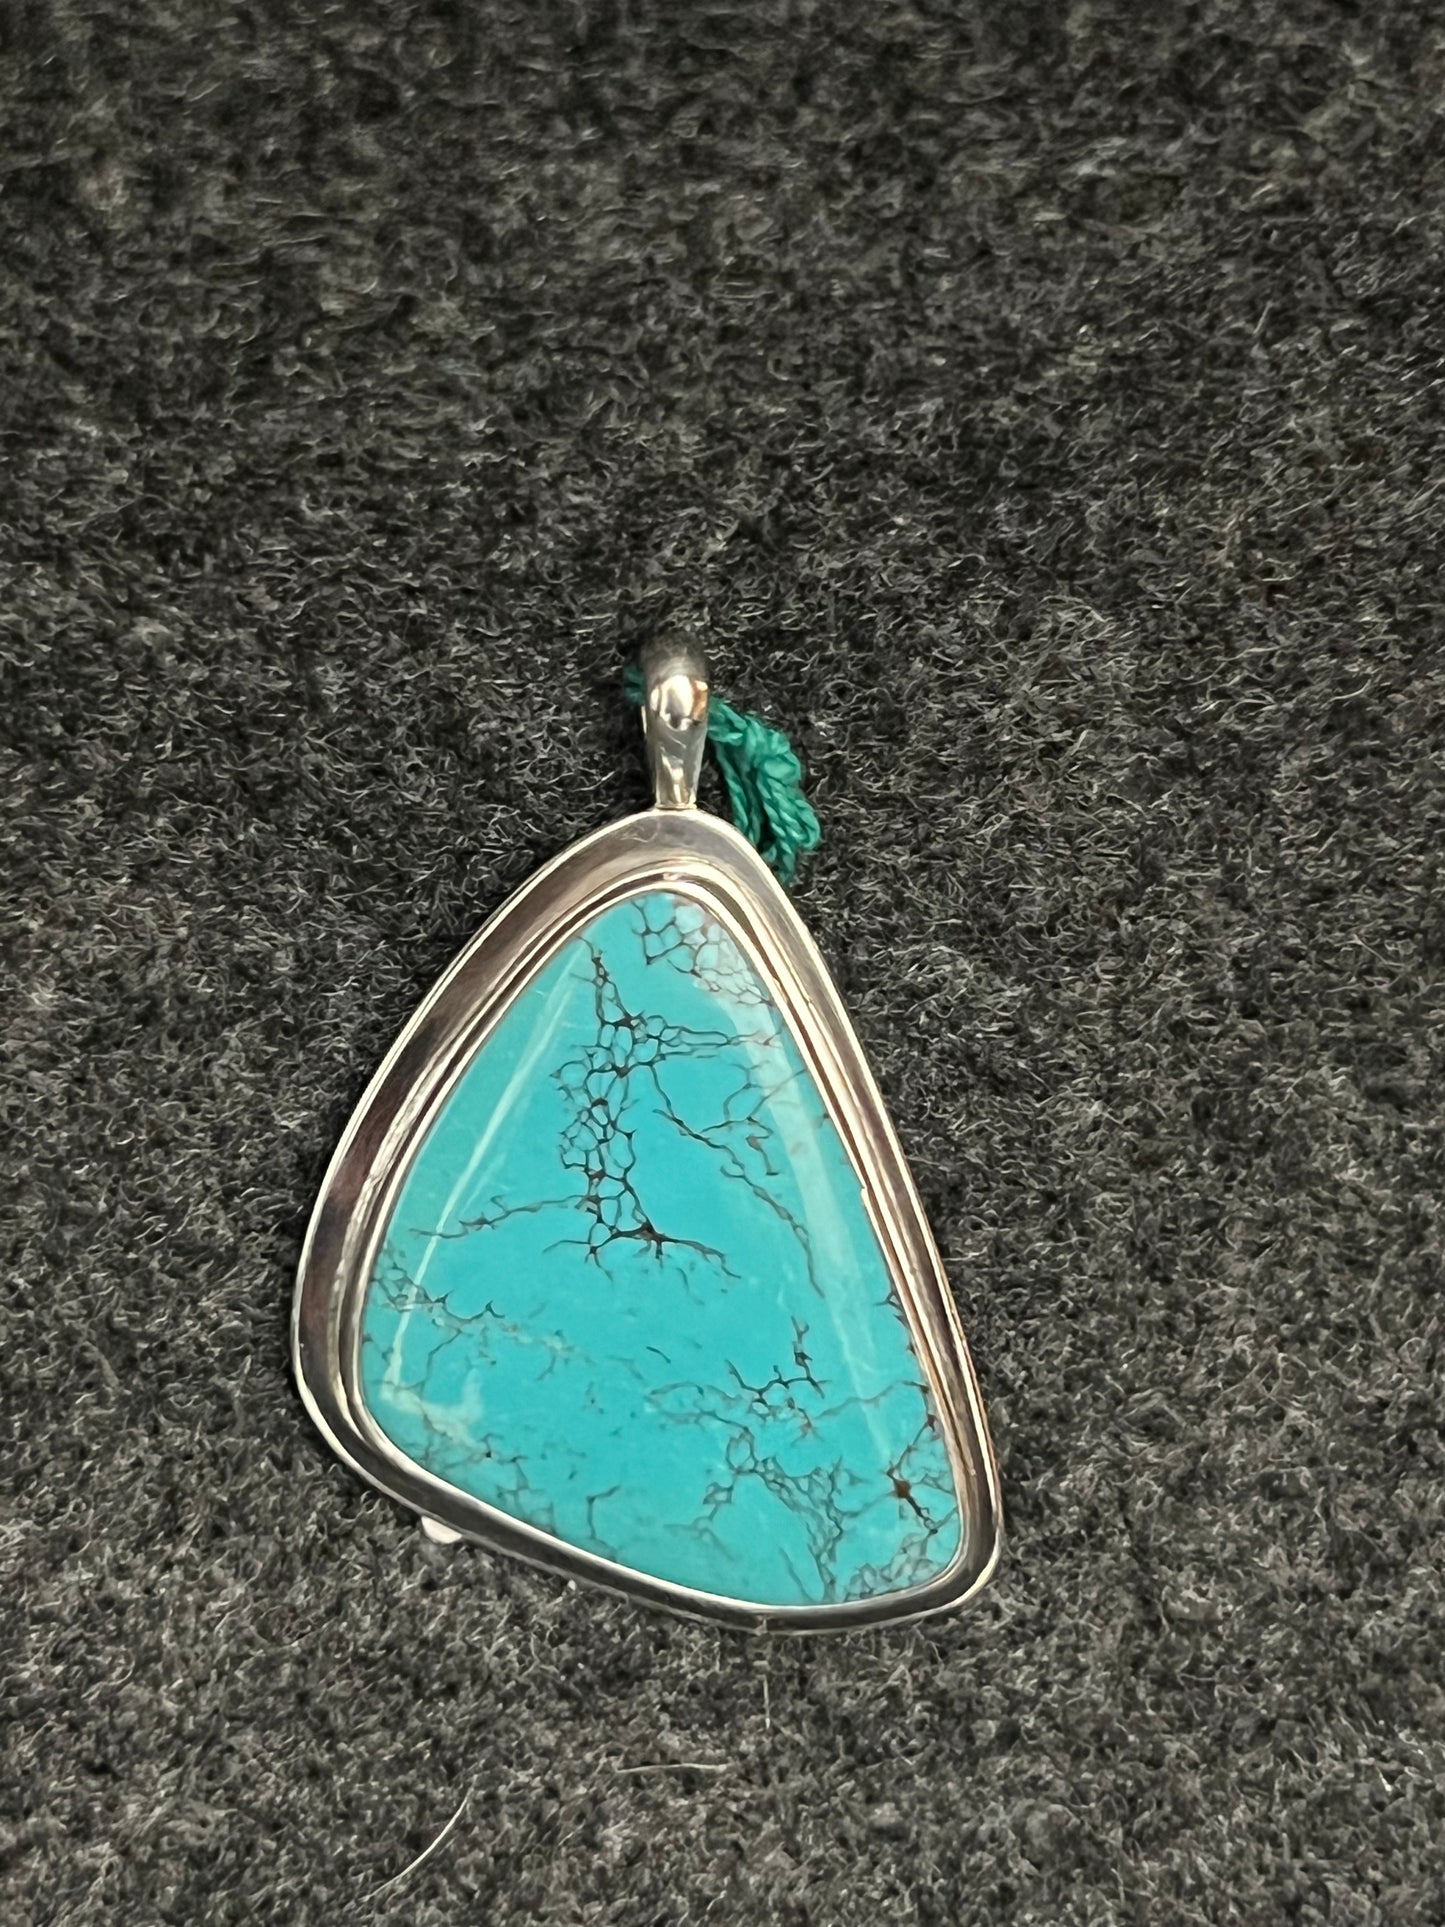 Turquoise Custom Pendant set in Sterling Silver